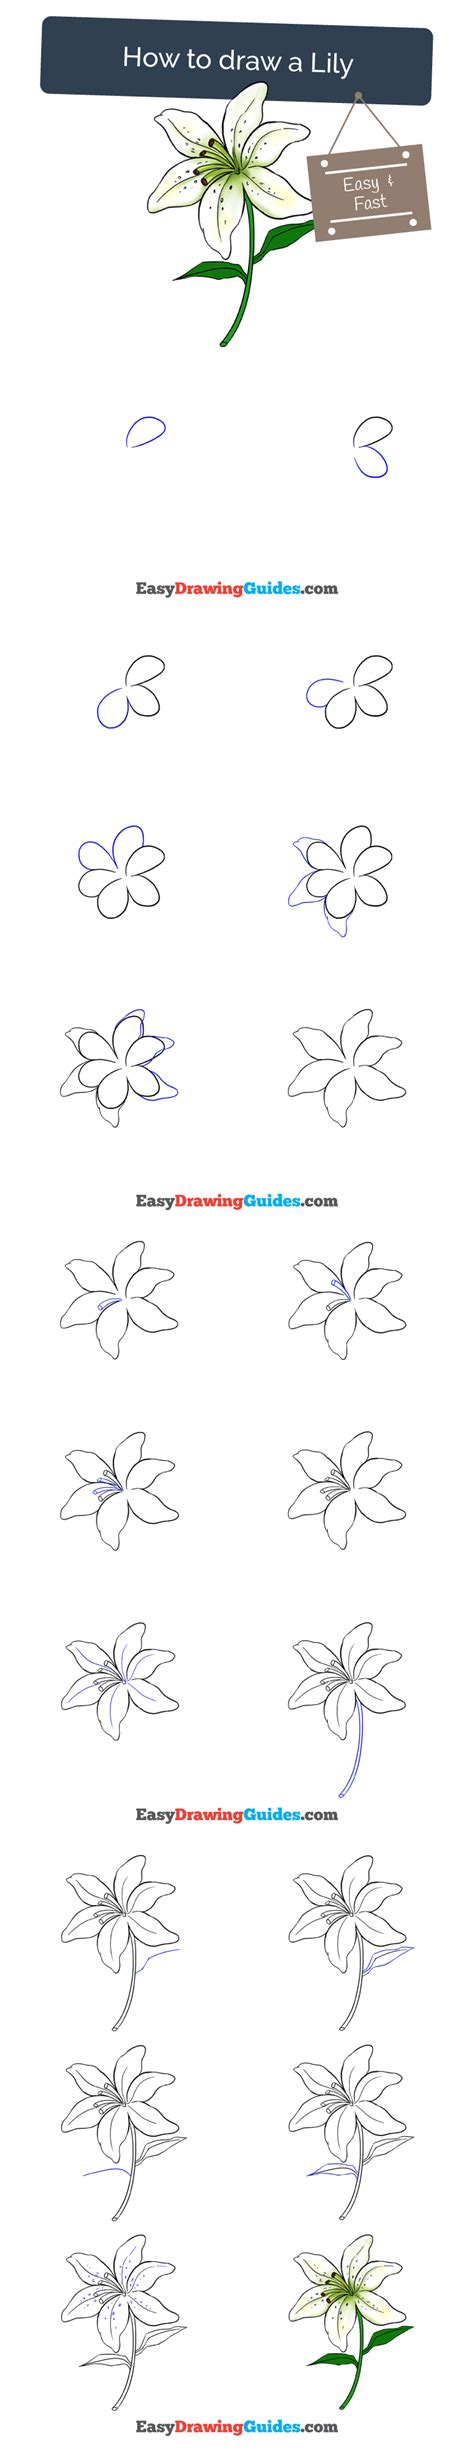 How To Draw A Lily In A Few Easy Steps Easy Drawing Guides Flower